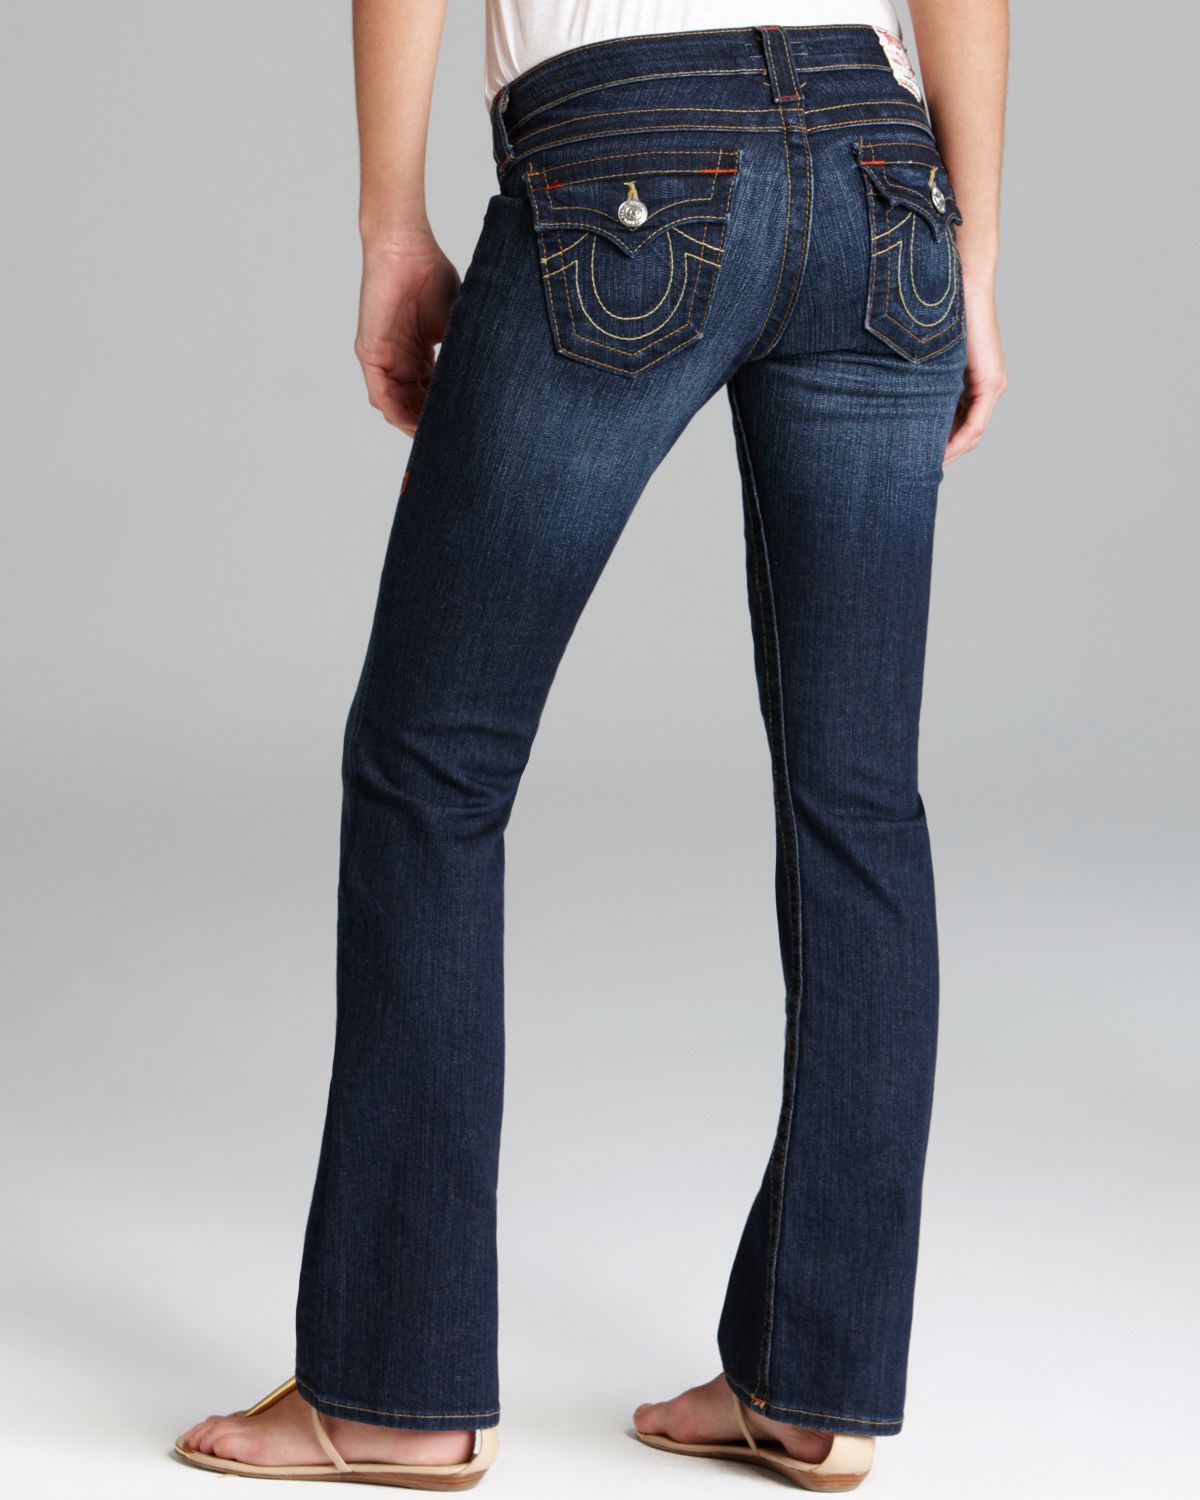 True Religion Jeans - Petite Becky Bootcut With Flap Pocket In Dusty ...